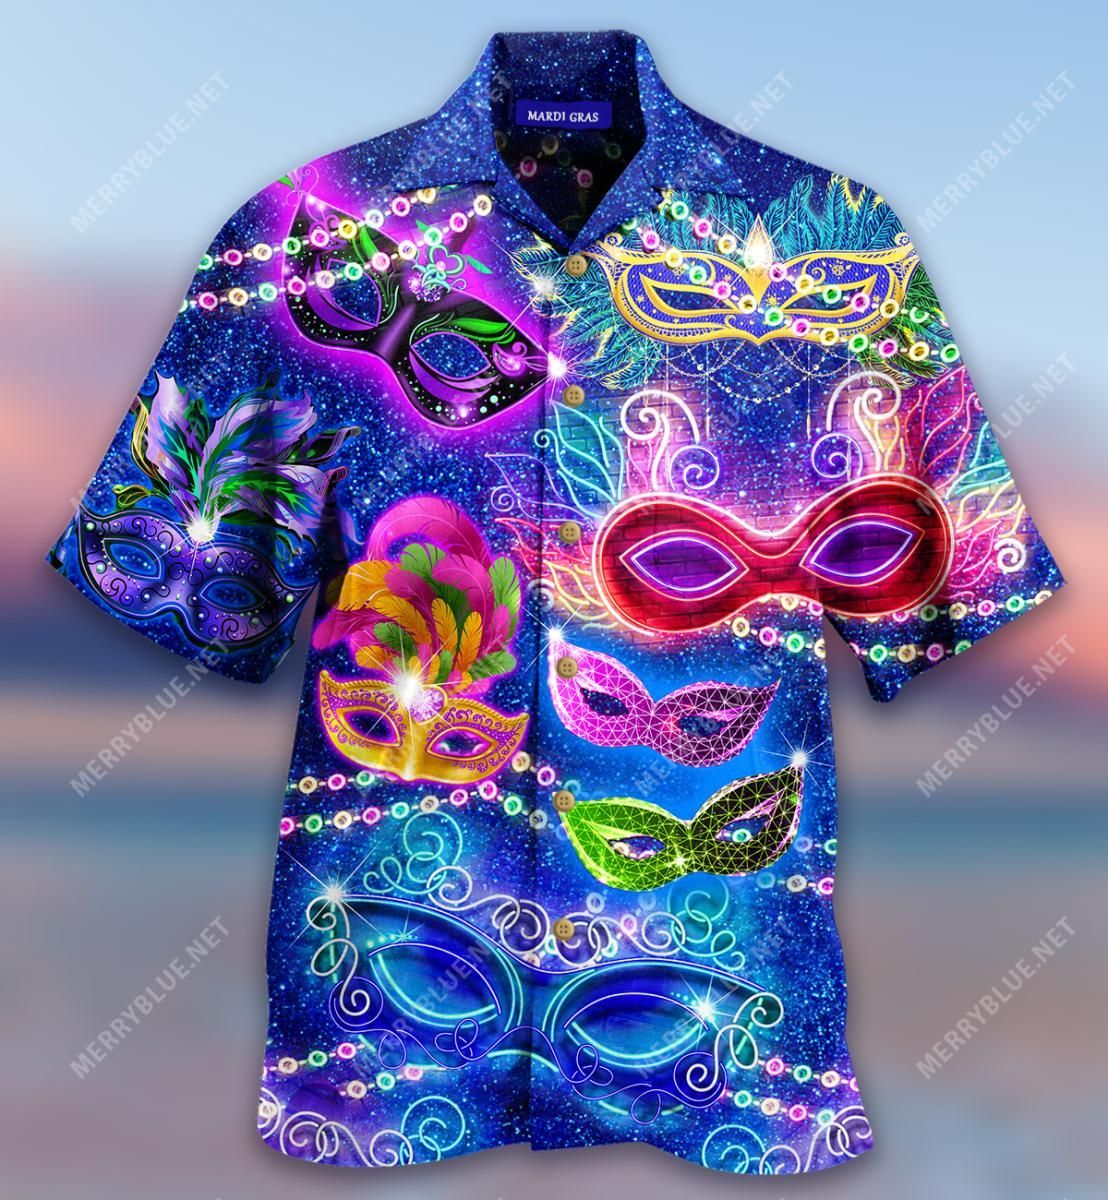 I'M Just Here For The Beads Mardi Gras Aloha Hawaiian Shirt Colorful Short Sleeve Summer Beach Casual Shirt For Men And Women